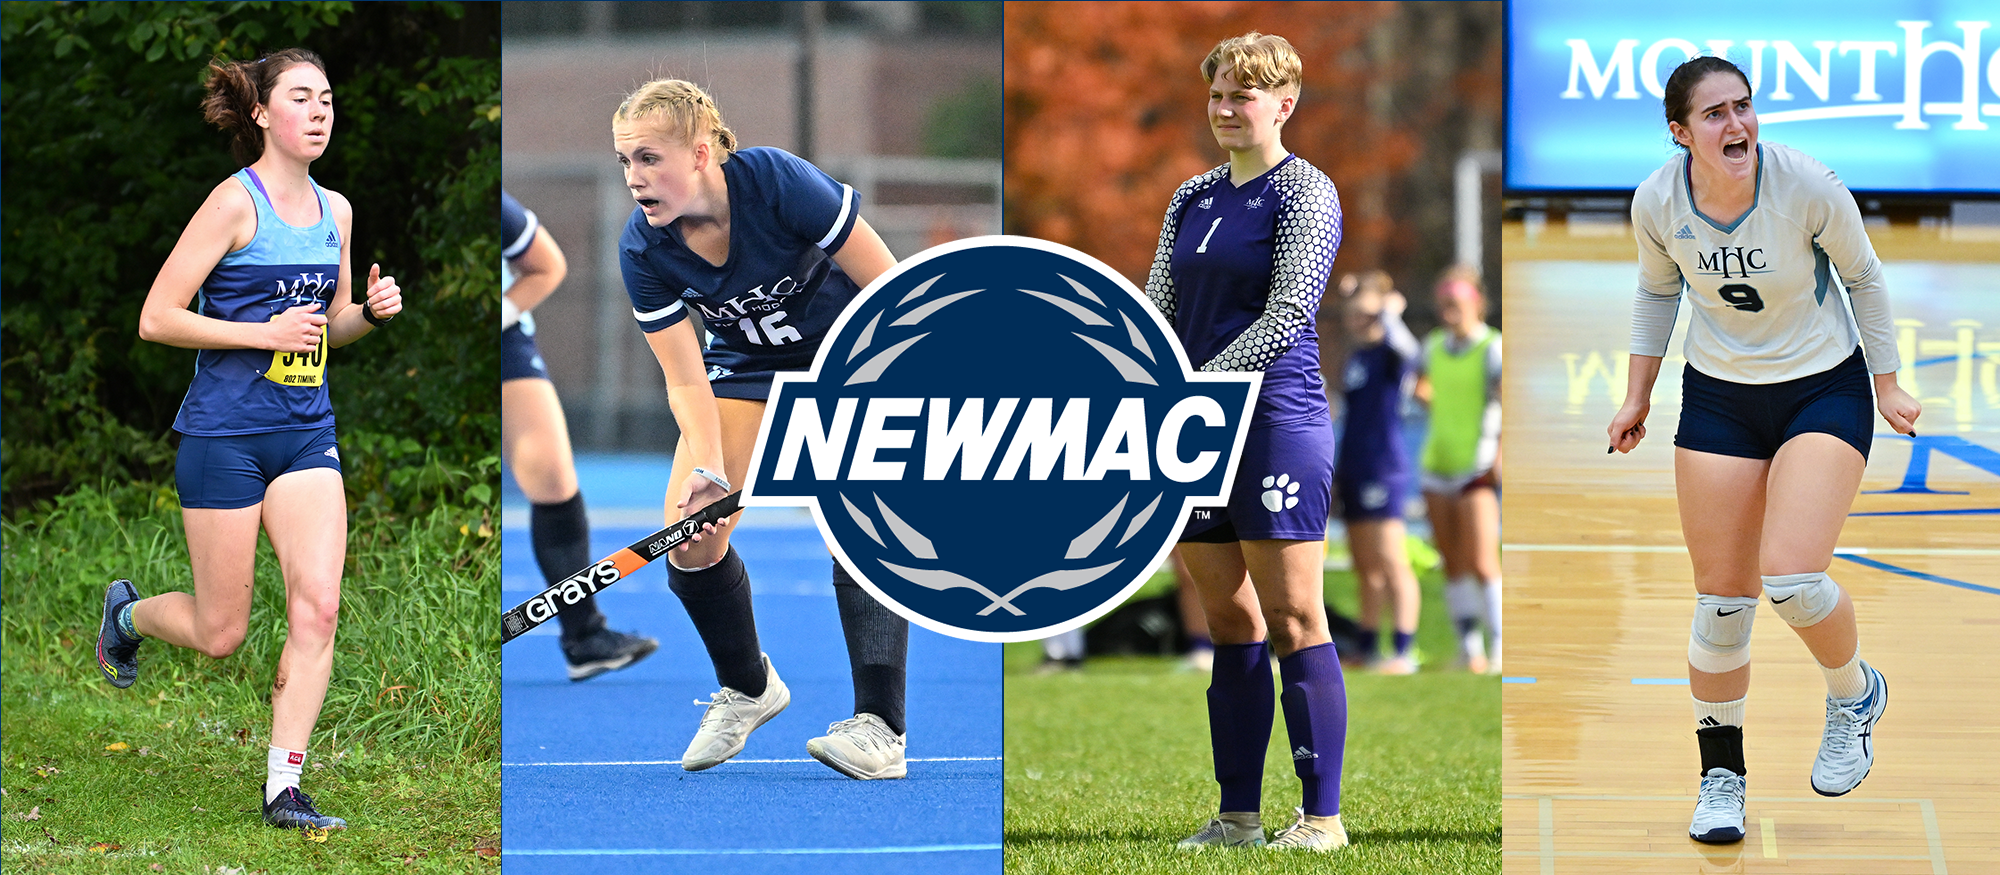 Mount Holyoke's 35 NEWMAC Fall Academic All-Conference honorees include seniors Lily Nemirovsky (cross country), Amanda Thibodeau (field hockey), Shannon Breen (soccer), and Lucie Berclaz (volleyball). (File photos by RJB Sports)